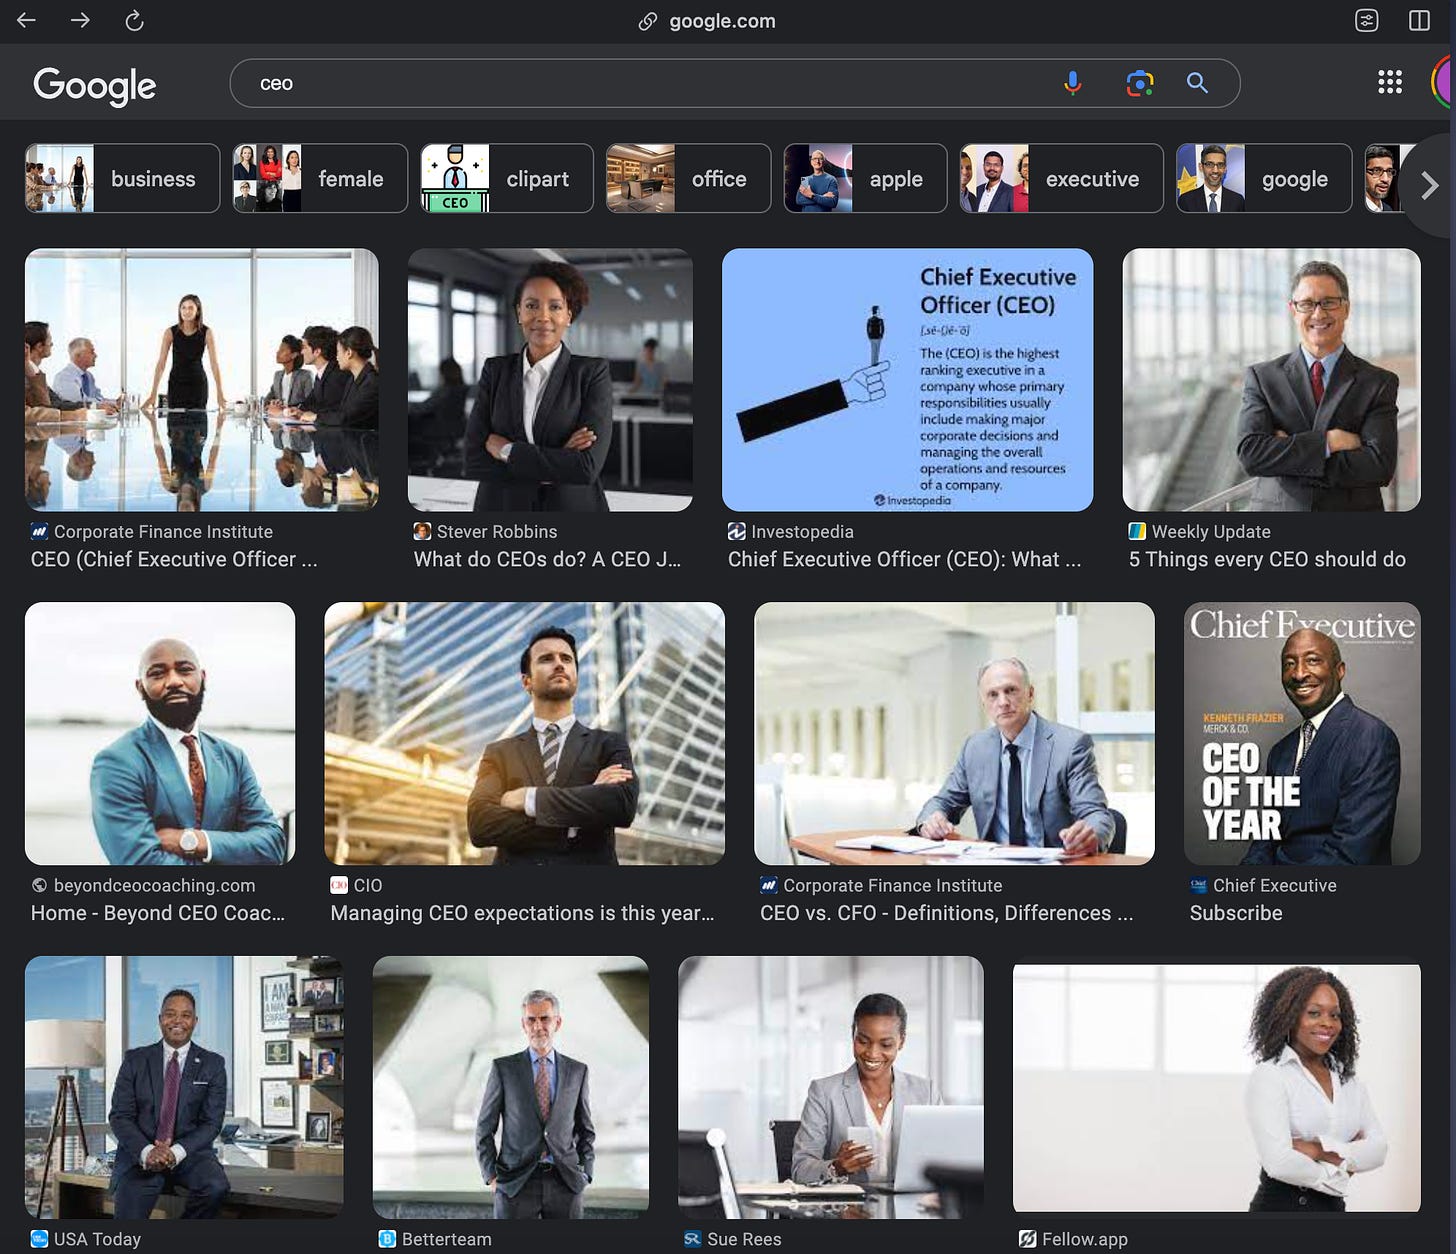 Google Image search results for "CEO", featuring three rows of men and women, all of whom are Black or white.